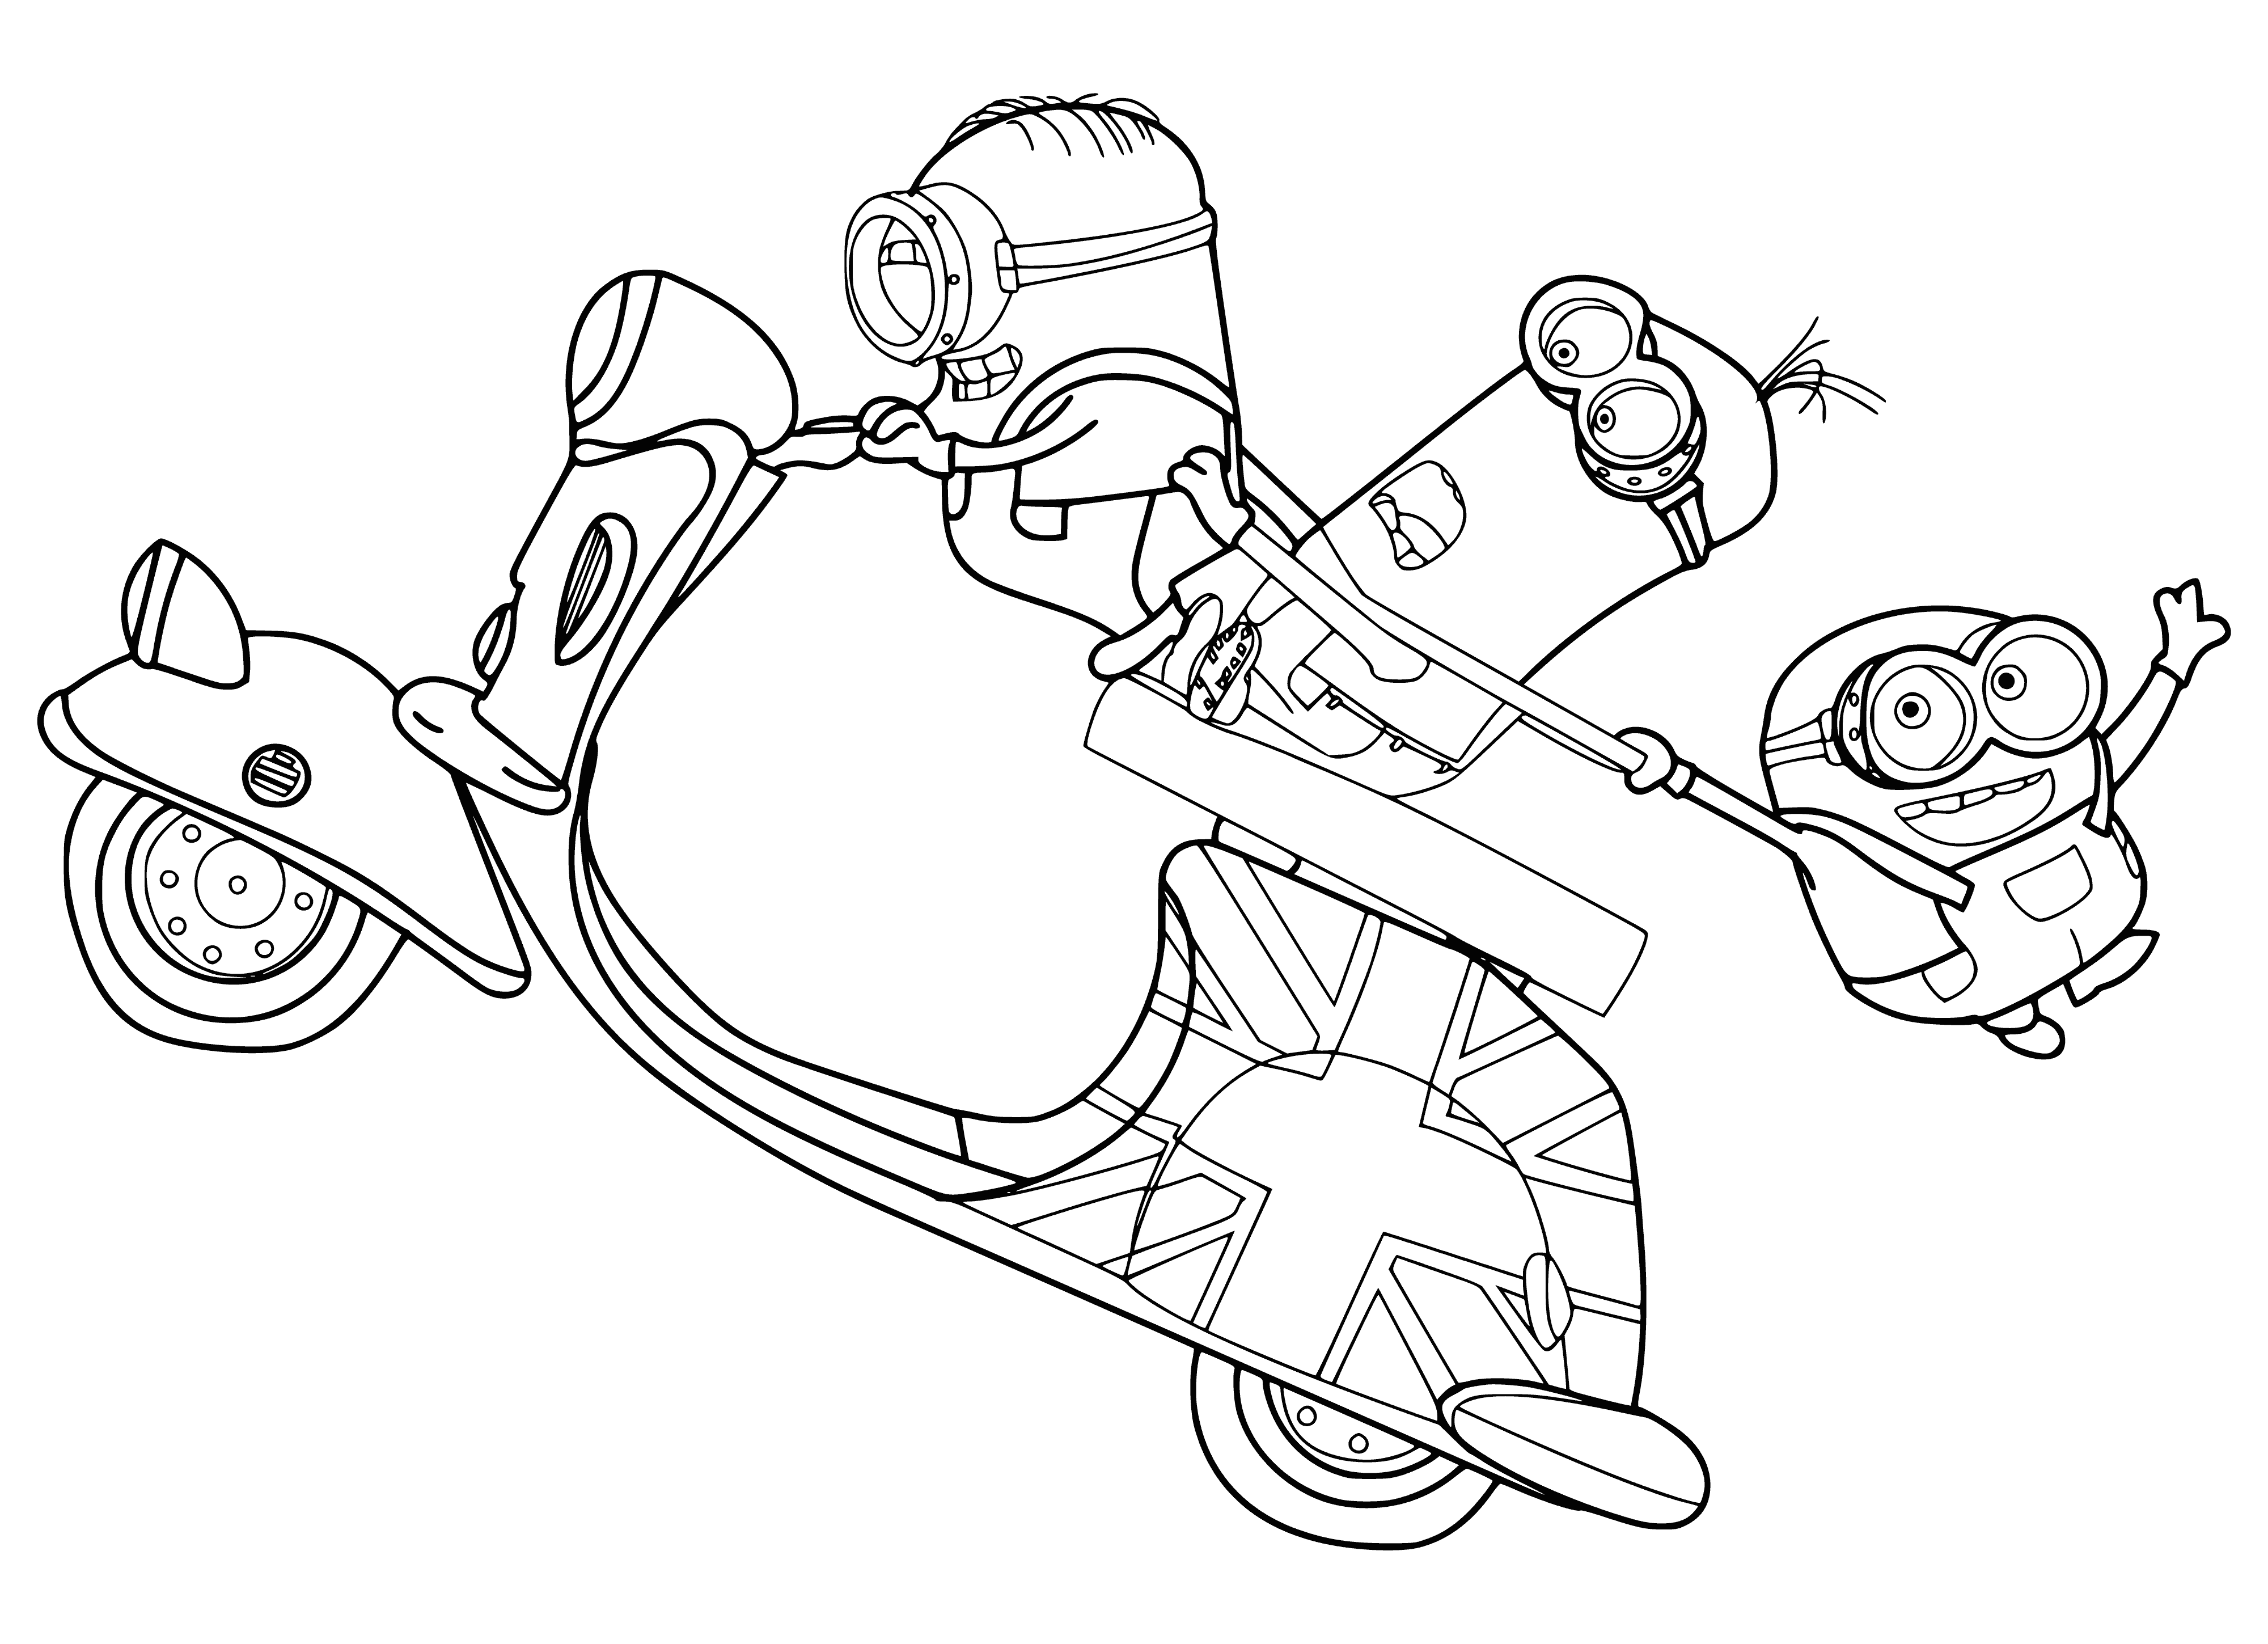 coloring page: Minions on motorcycle: orange, one-eyed, blue overalls, yellow hair; one Minion driving, one sitting in back. #minionmania